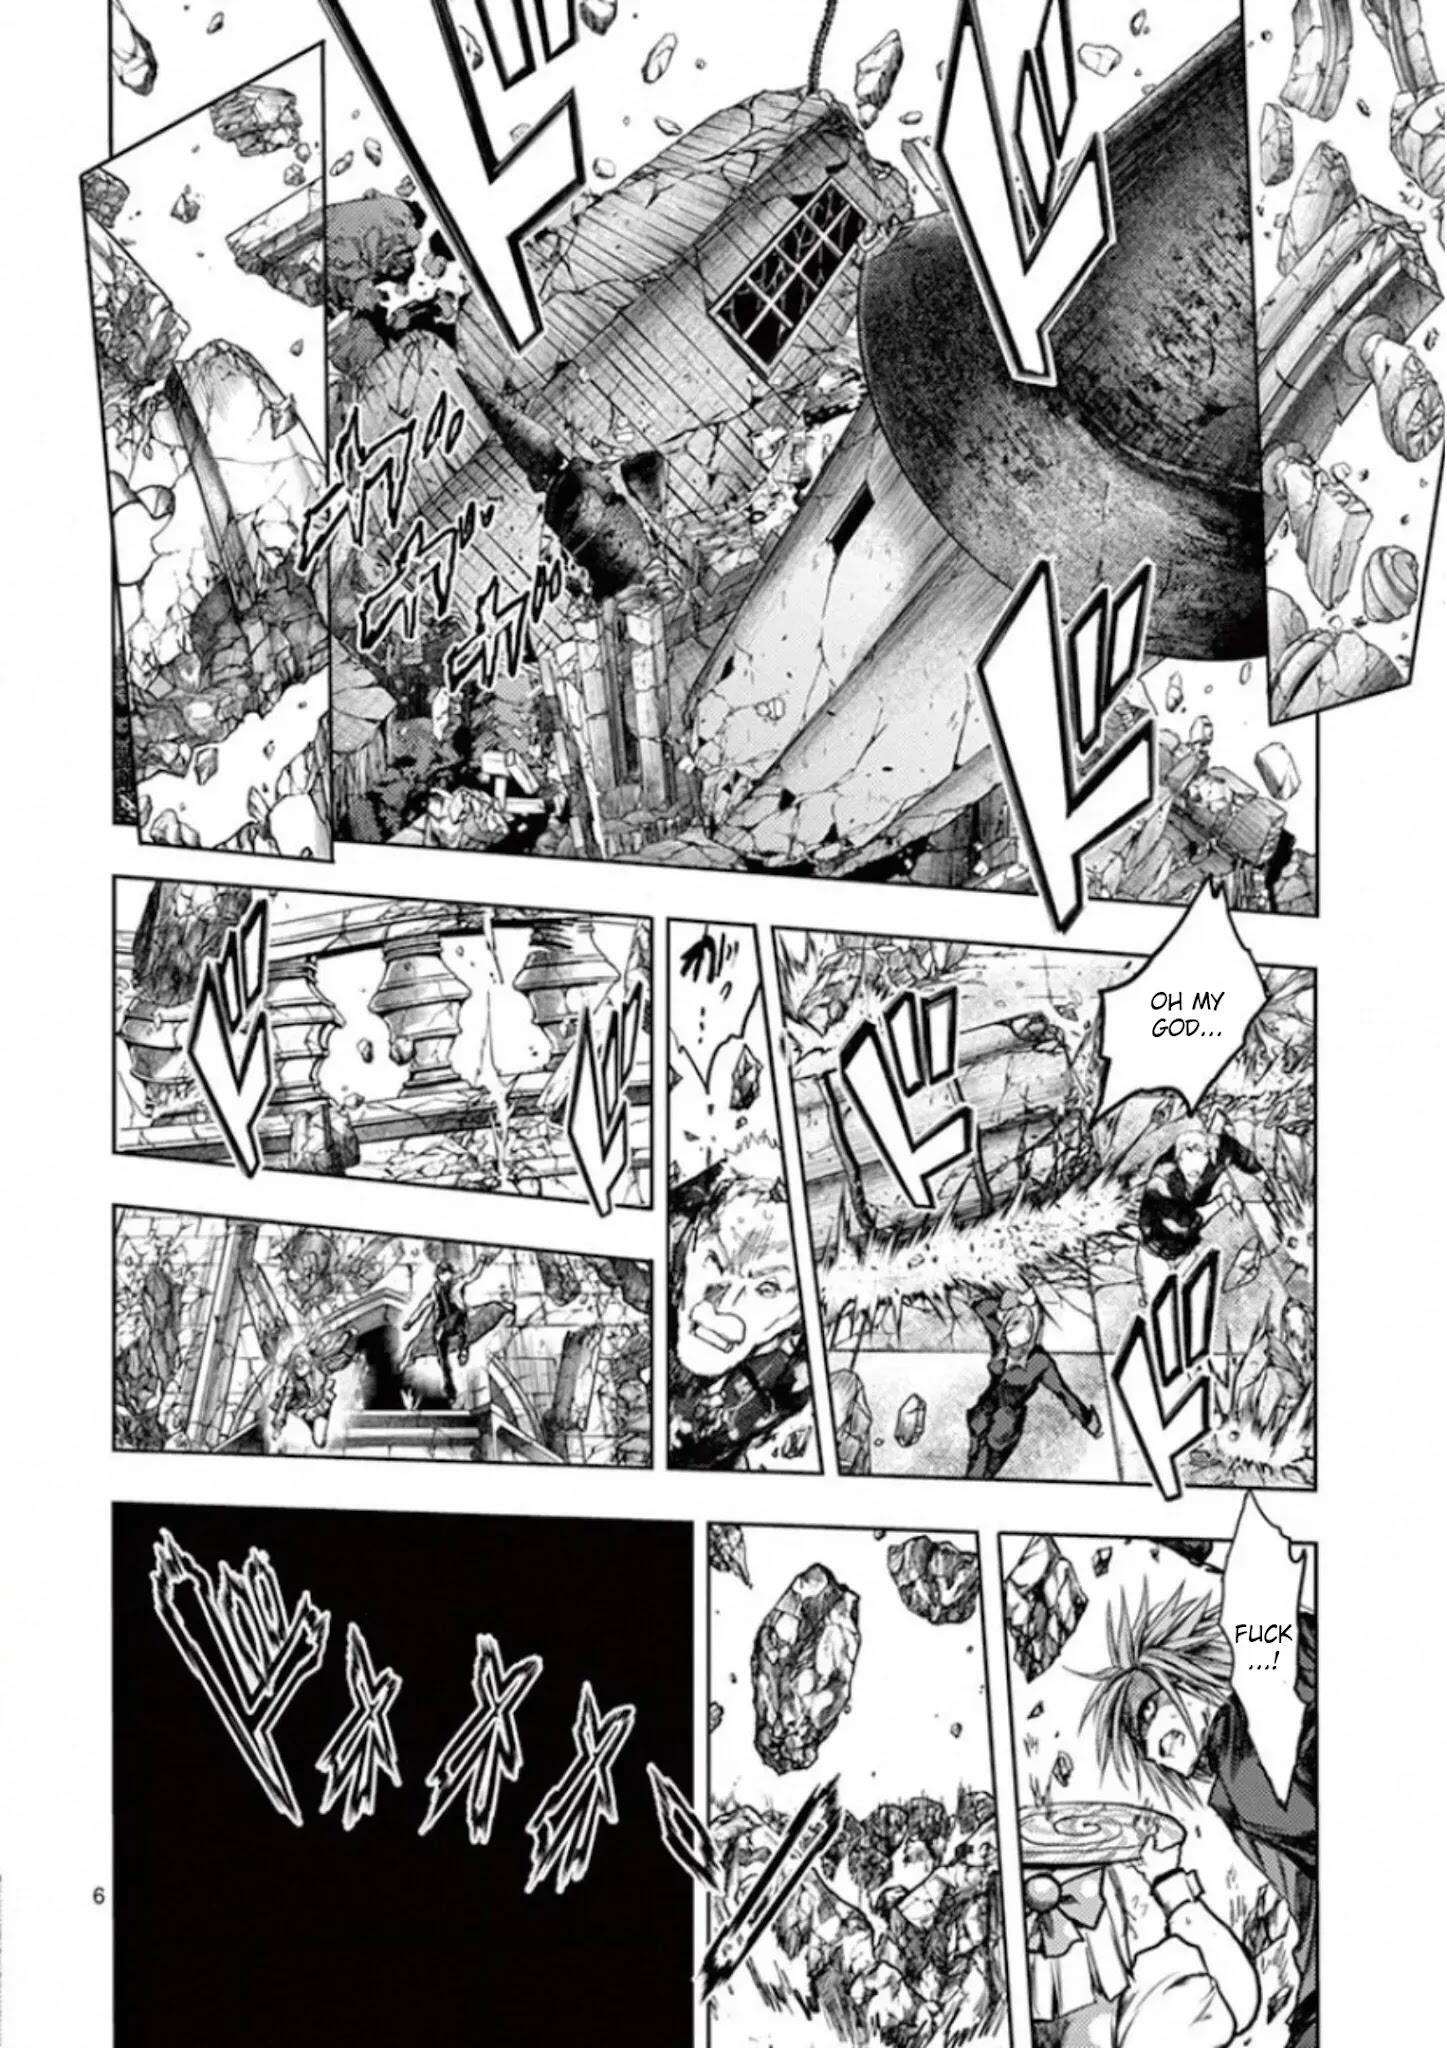 Deatte 5 Byou De Battle Chapter 143: To The Exit page 6 - Mangakakalots.com